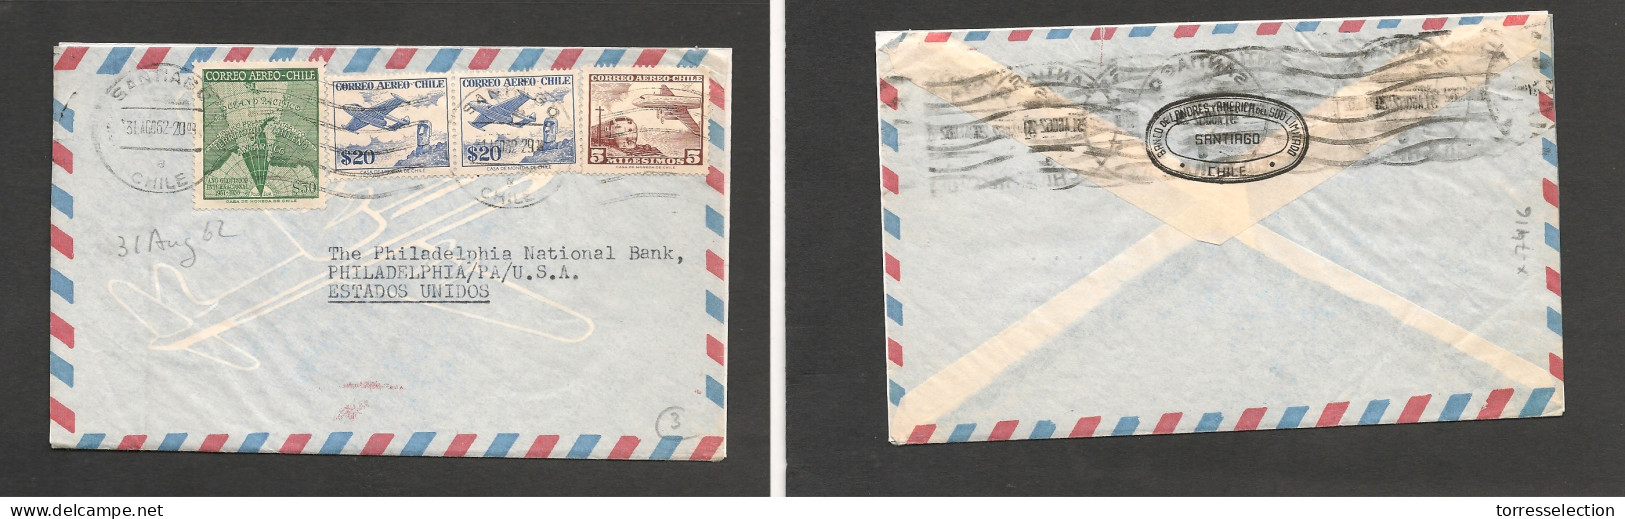 CHILE. Chile - Cover - 1962 31 Aug Stgo To USA Pha Air Mult Fkd Env $90,05 RateEx-Prof West UK Airmails Coll.- . Easy De - Chile